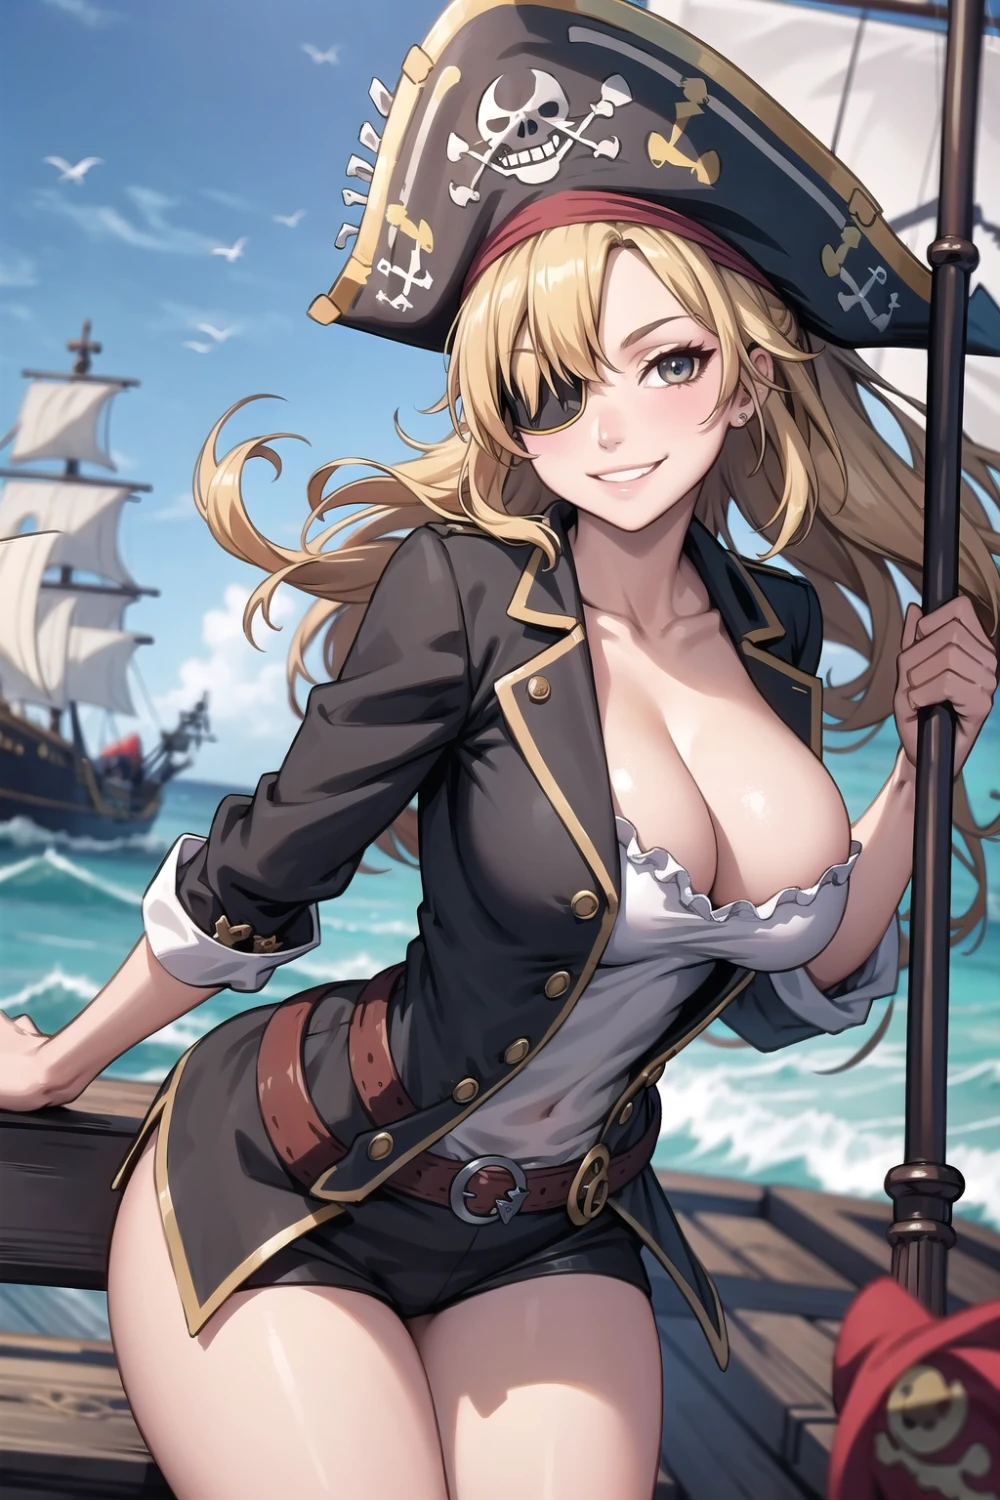 cleavage-anime-style-all-ages-27